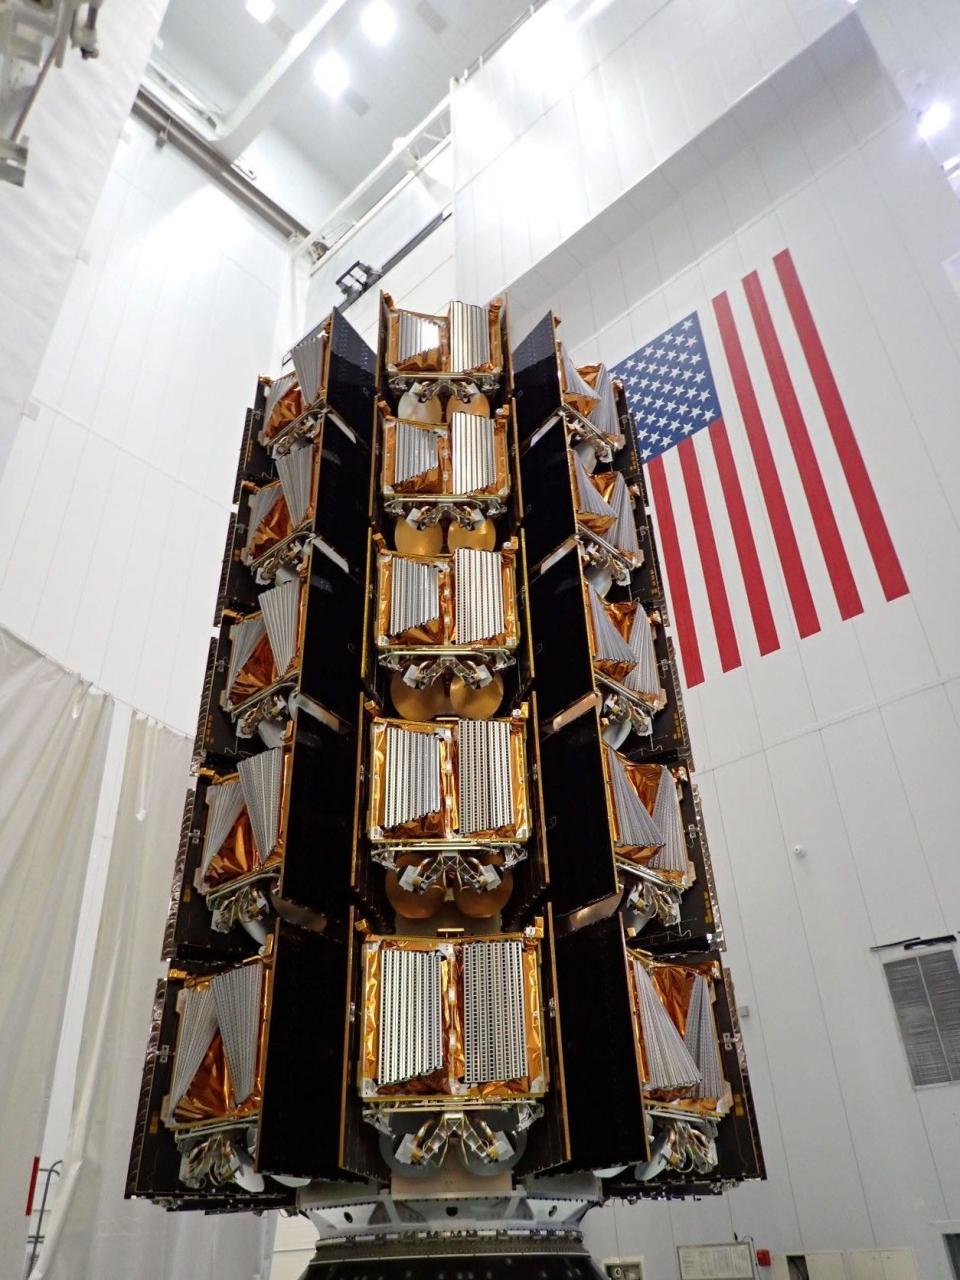 A stack of 40 OneWeb internet-beaming satellites is seen here prior to encapsulation inside the protective nosecone payload fairing of a SpaceX Falcon 9. Once deployed, the fleet will complete 80% of OneWeb's first-generation constellation of 648 satellites in low Earth orbit to deliver global wholesale connectivity for its partners.